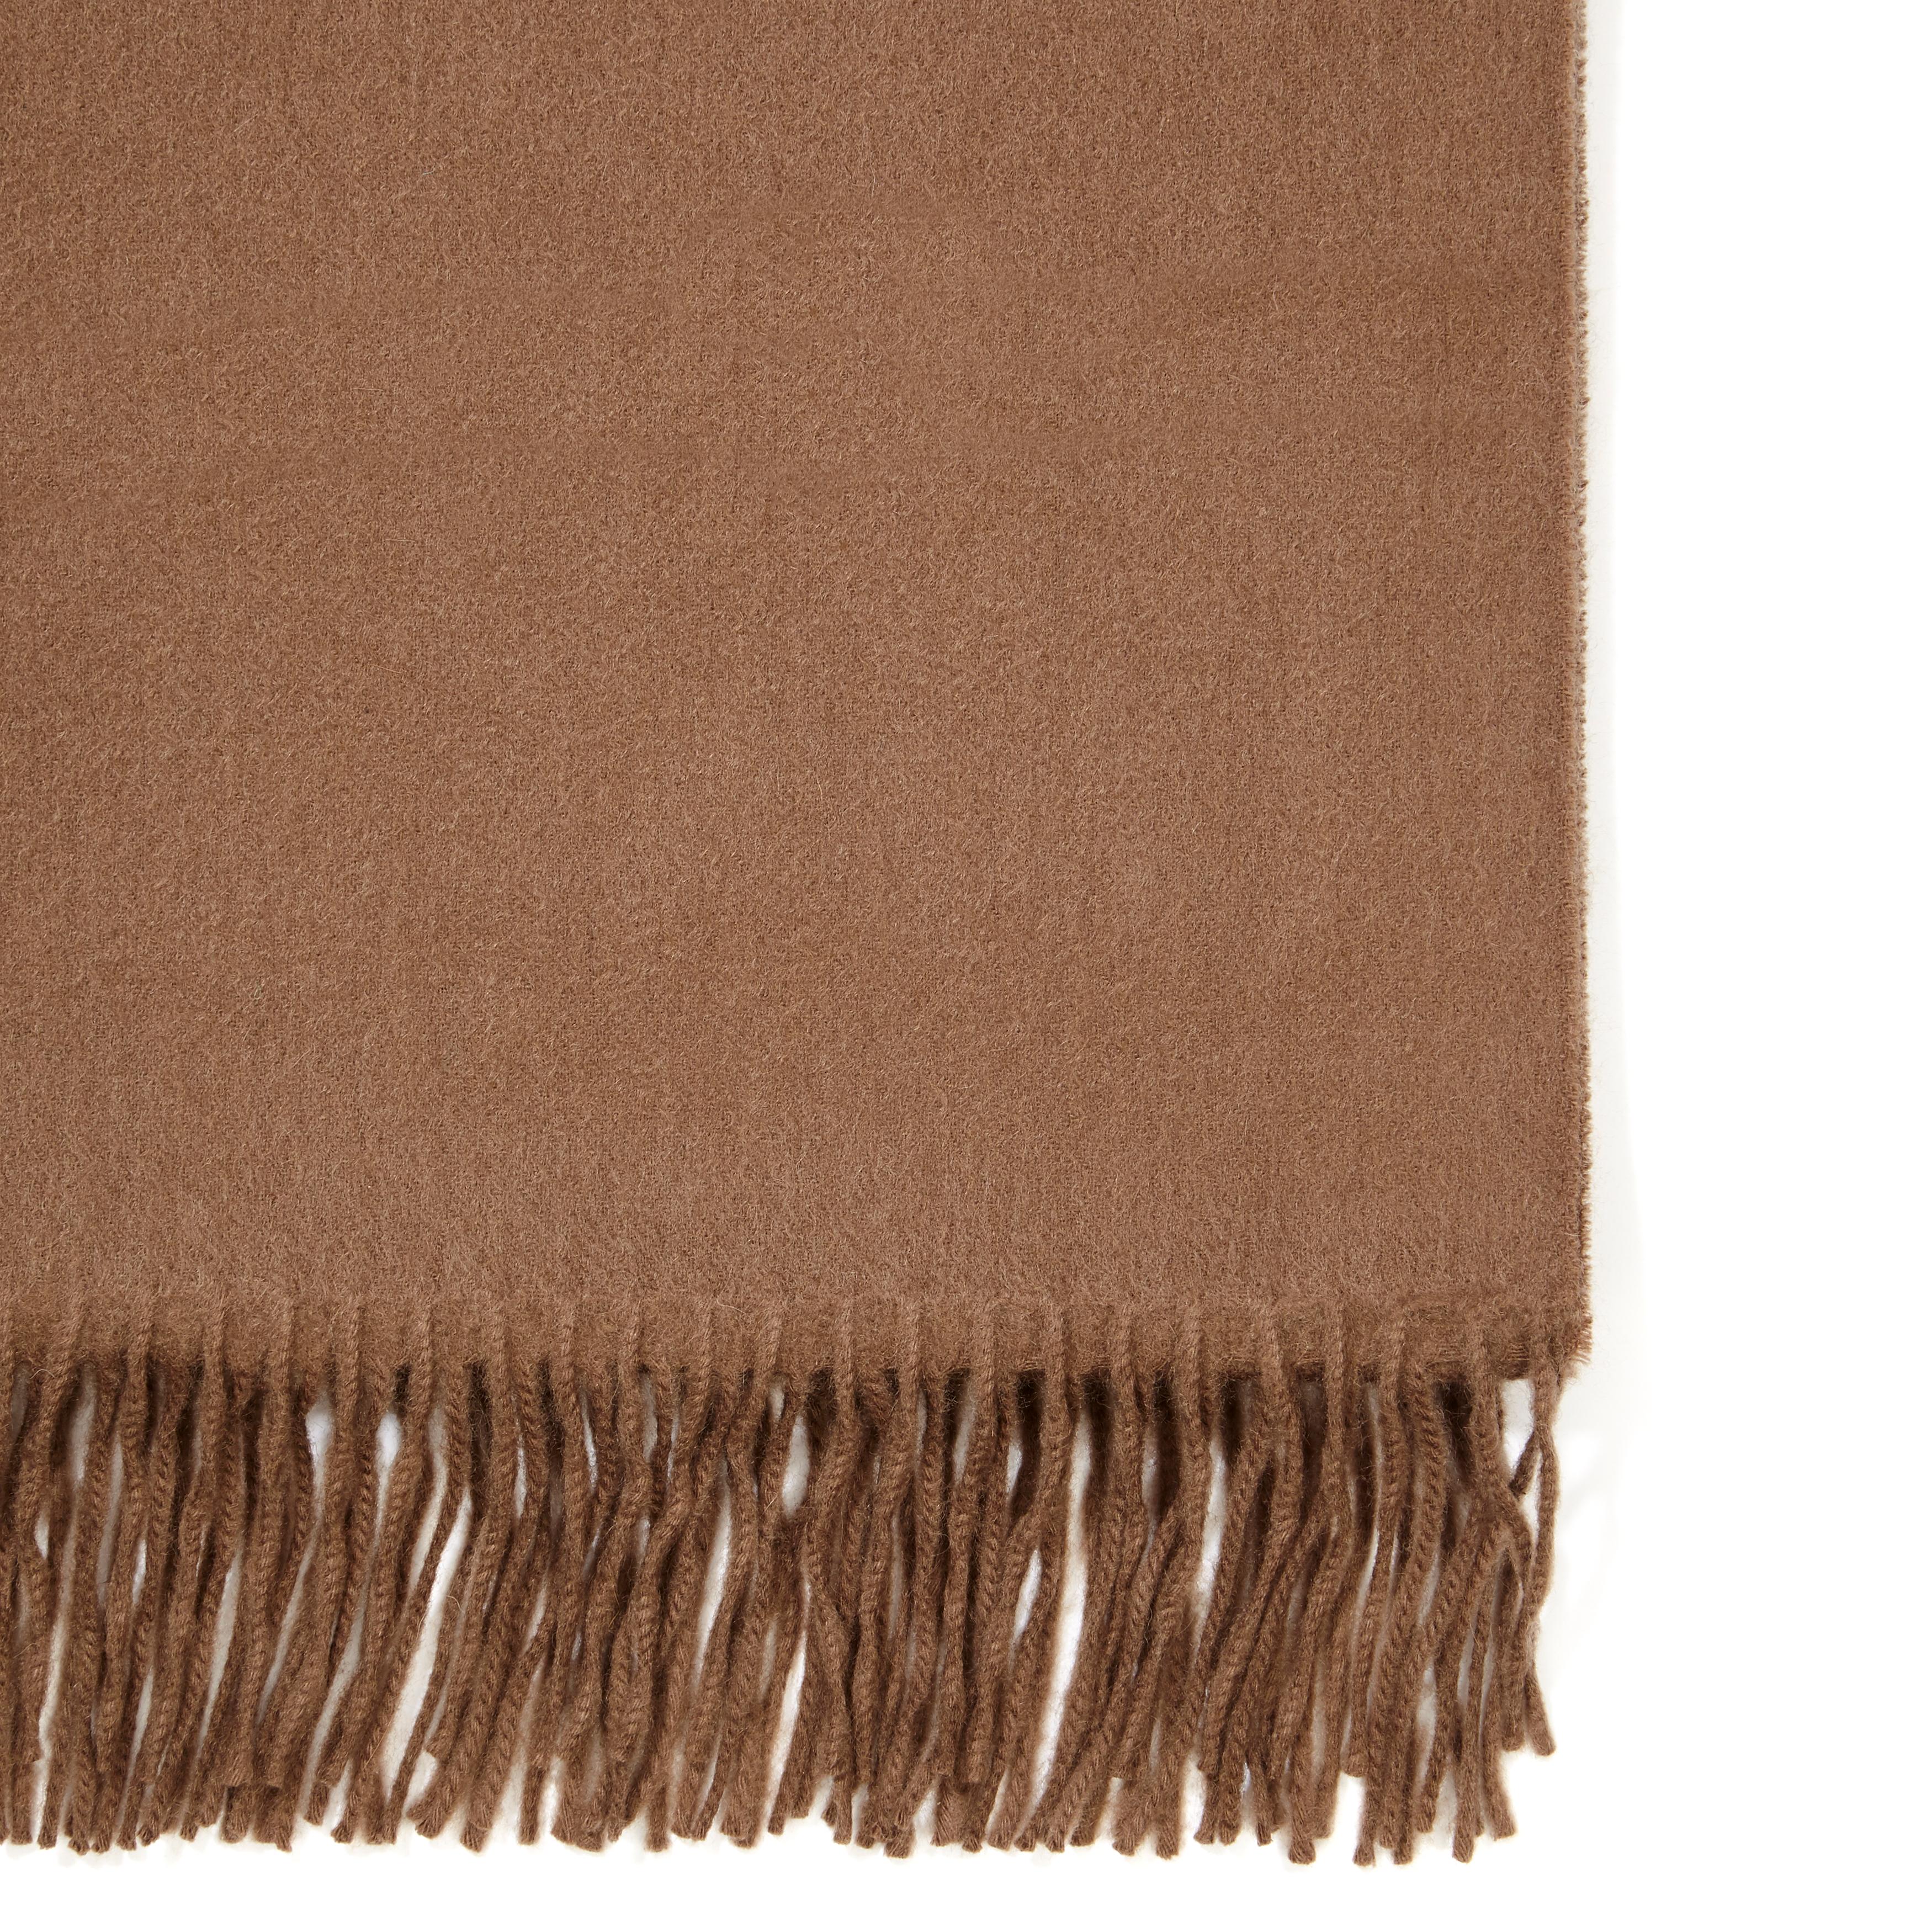 Scottish 100% Cashmere Shawl in Soft Brown - Brand New 
Verheyen London’s shawl is spun from the finest Scottish woven cashmere.  Its warmth envelopes you with luxury, perfect for travel and comfort wherever you are.

PRODUCT DETAILS
Verheyen London